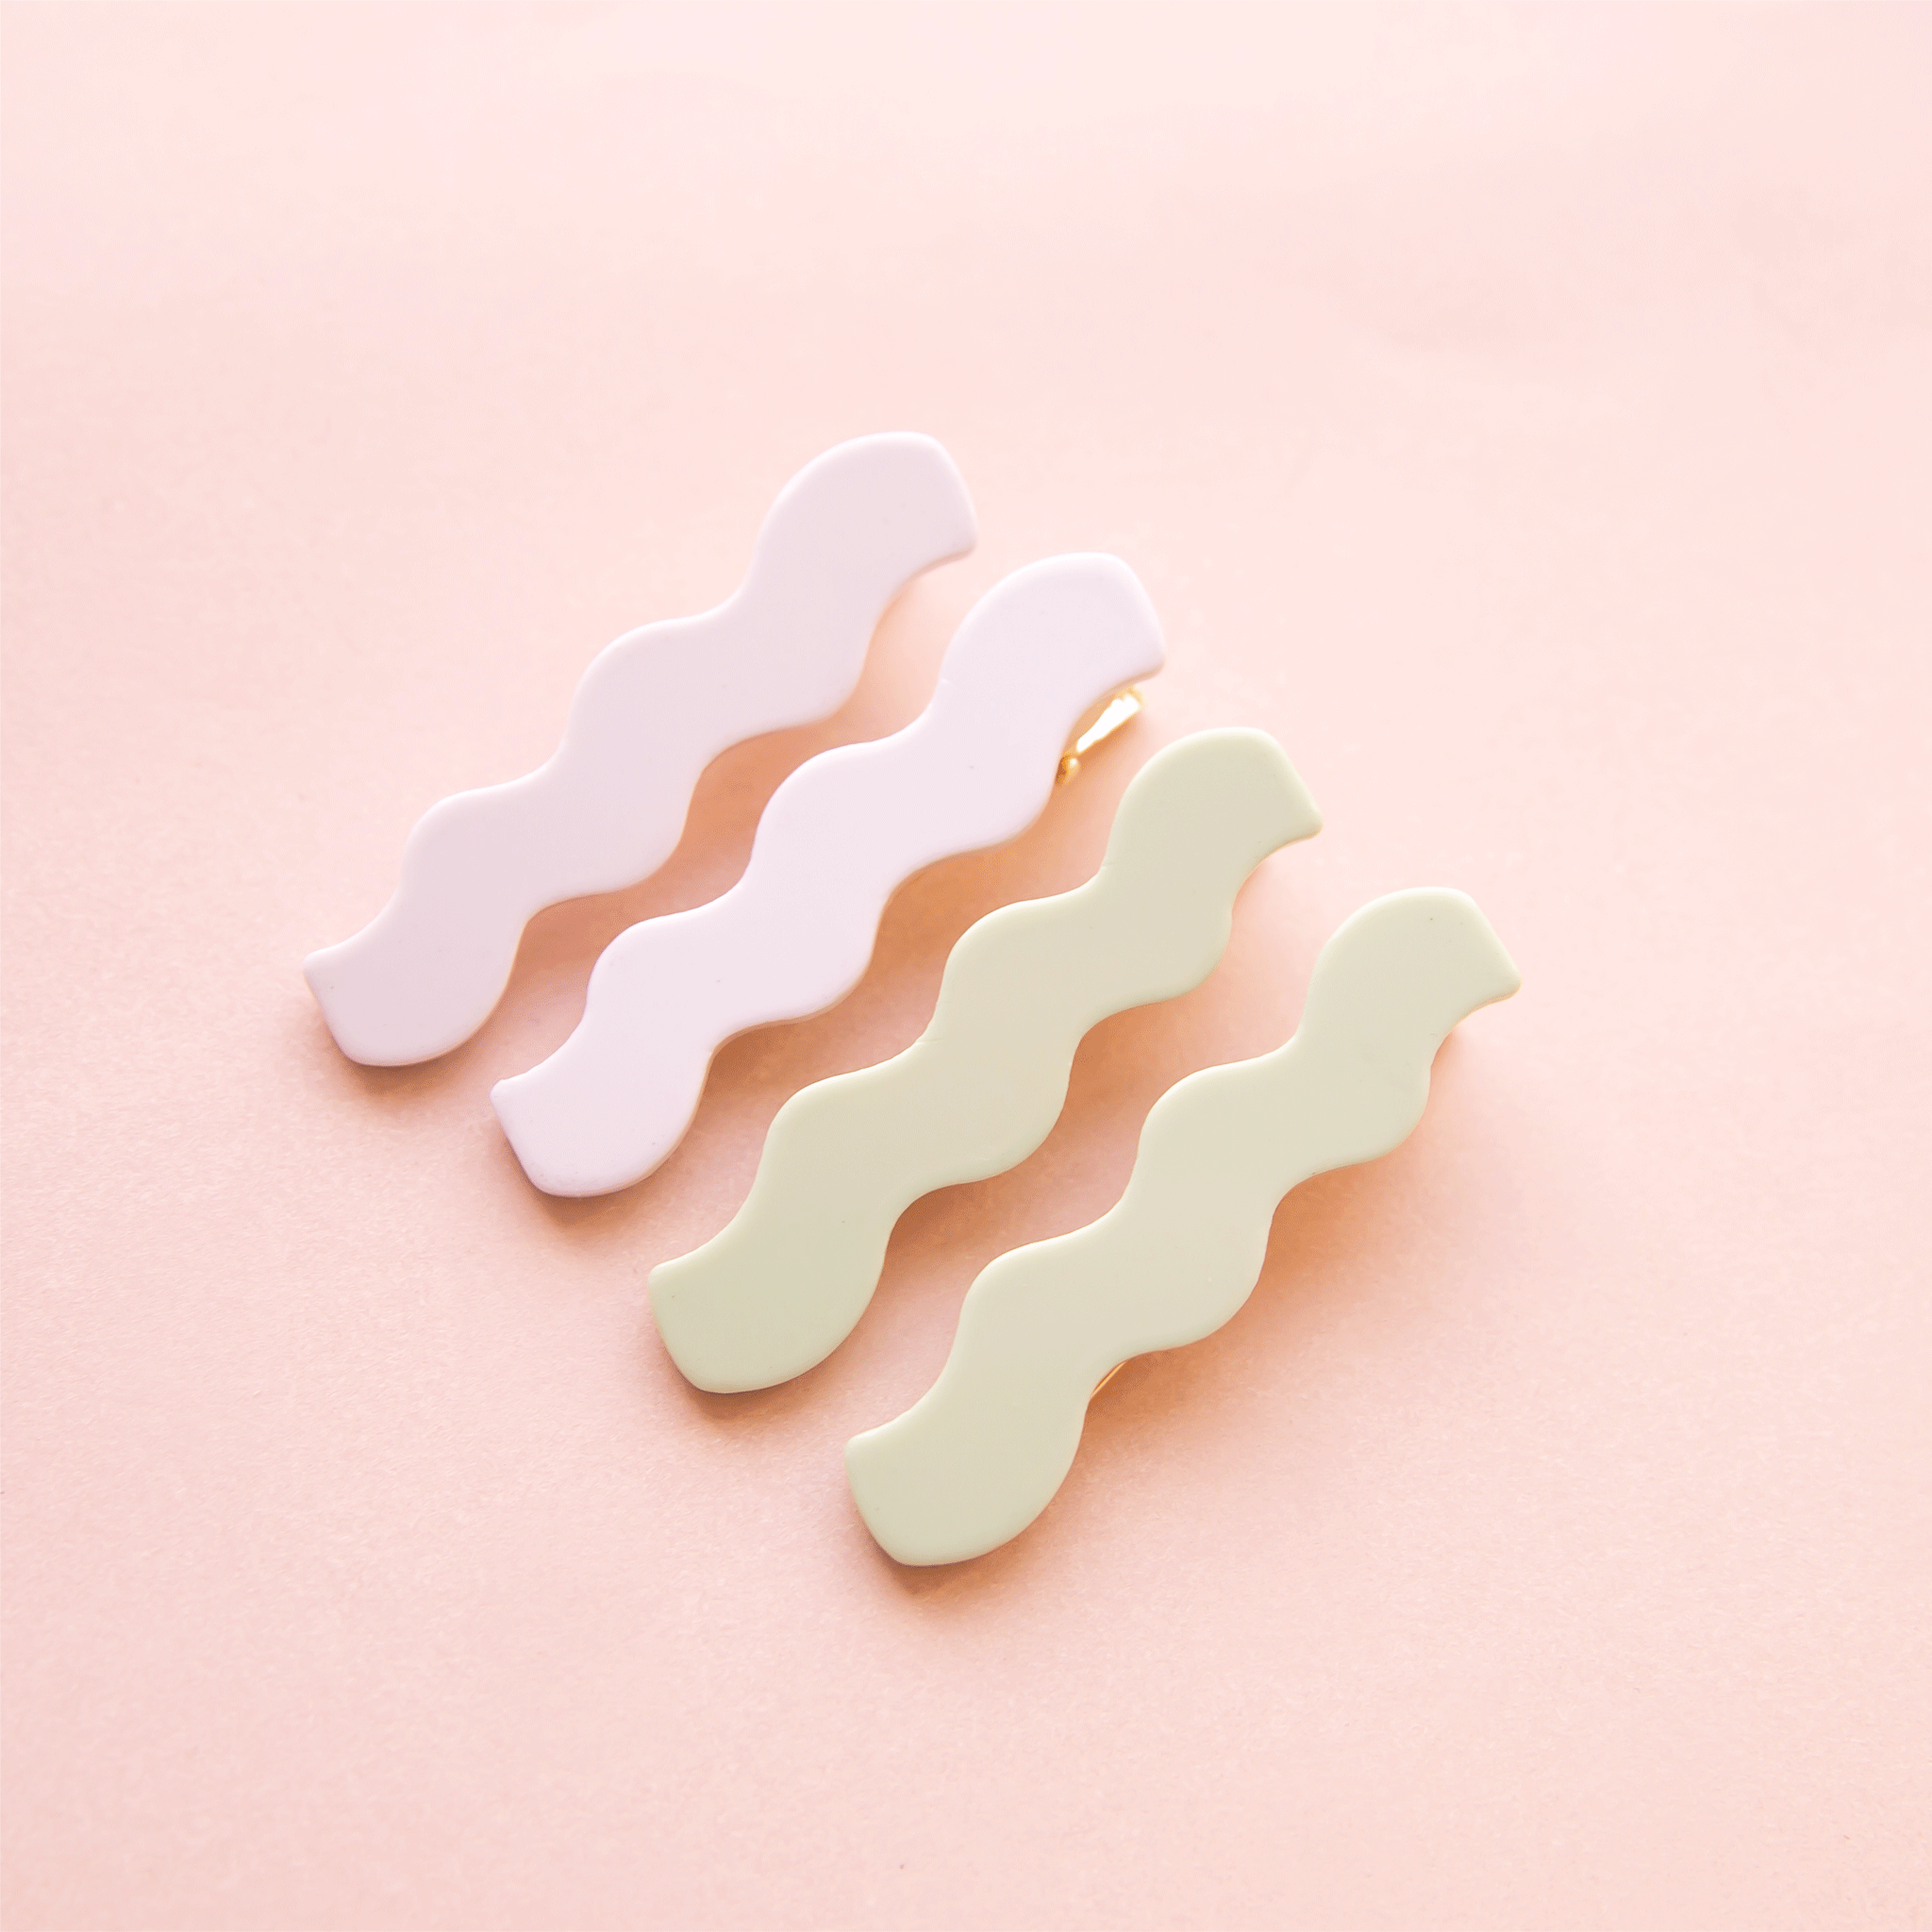 On a pink background is two sets of wavy shaped hair clips in a light green/blue shade and shade of white.